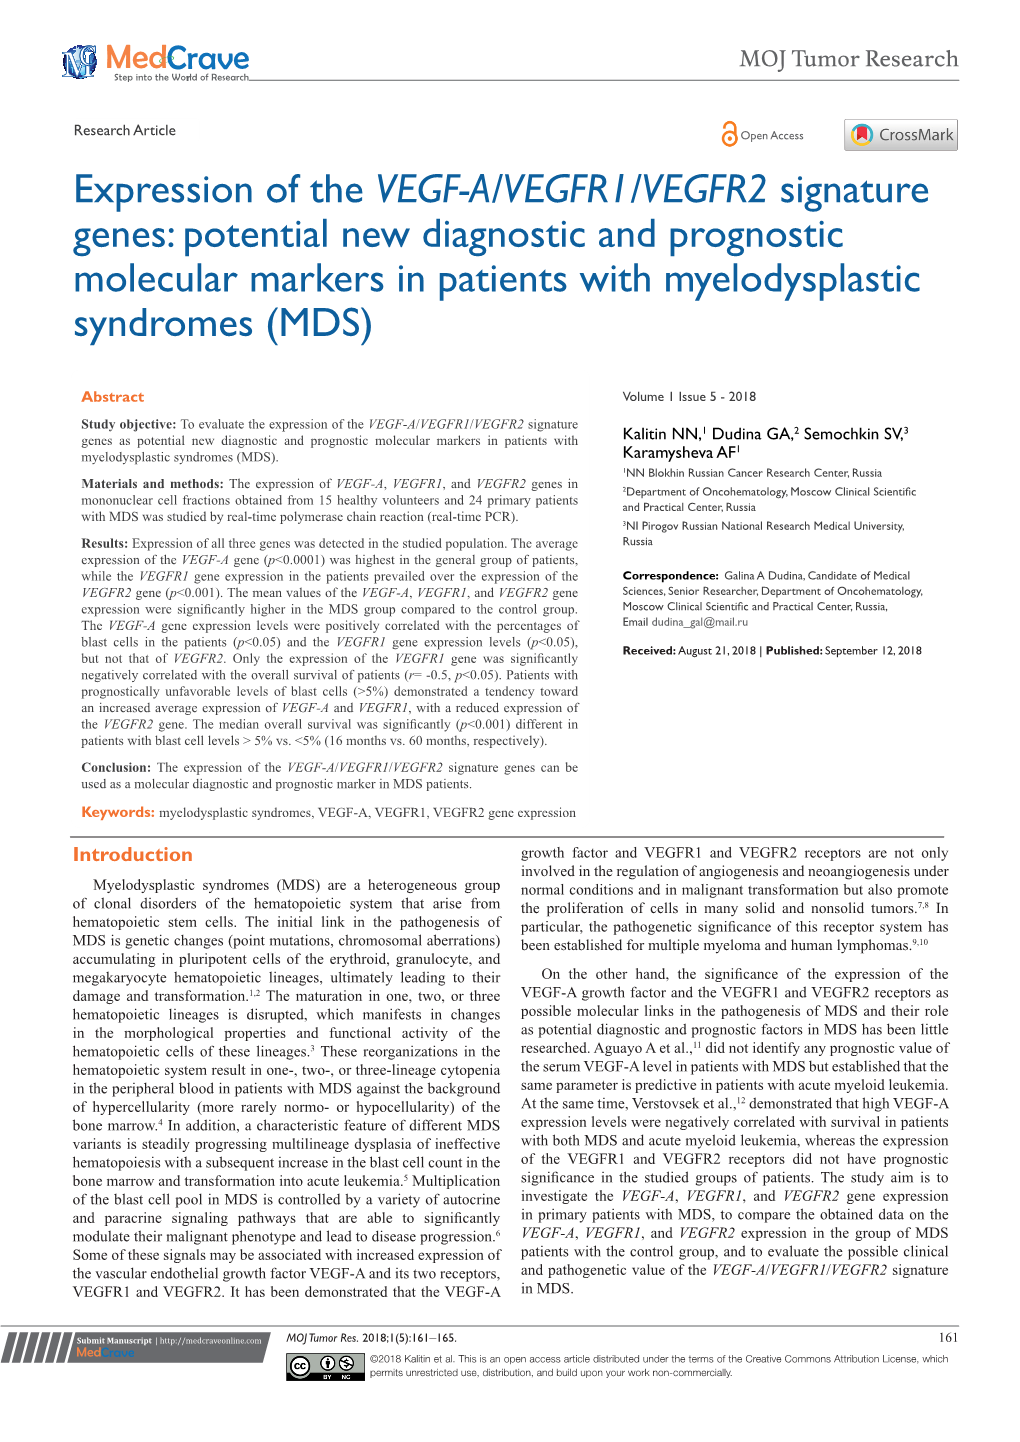 Expression of the VEGF-A/VEGFR1/VEGFR2 Signature Genes: Potential New Diagnostic and Prognostic Molecular Markers in Patients with Myelodysplastic Syndromes (MDS)